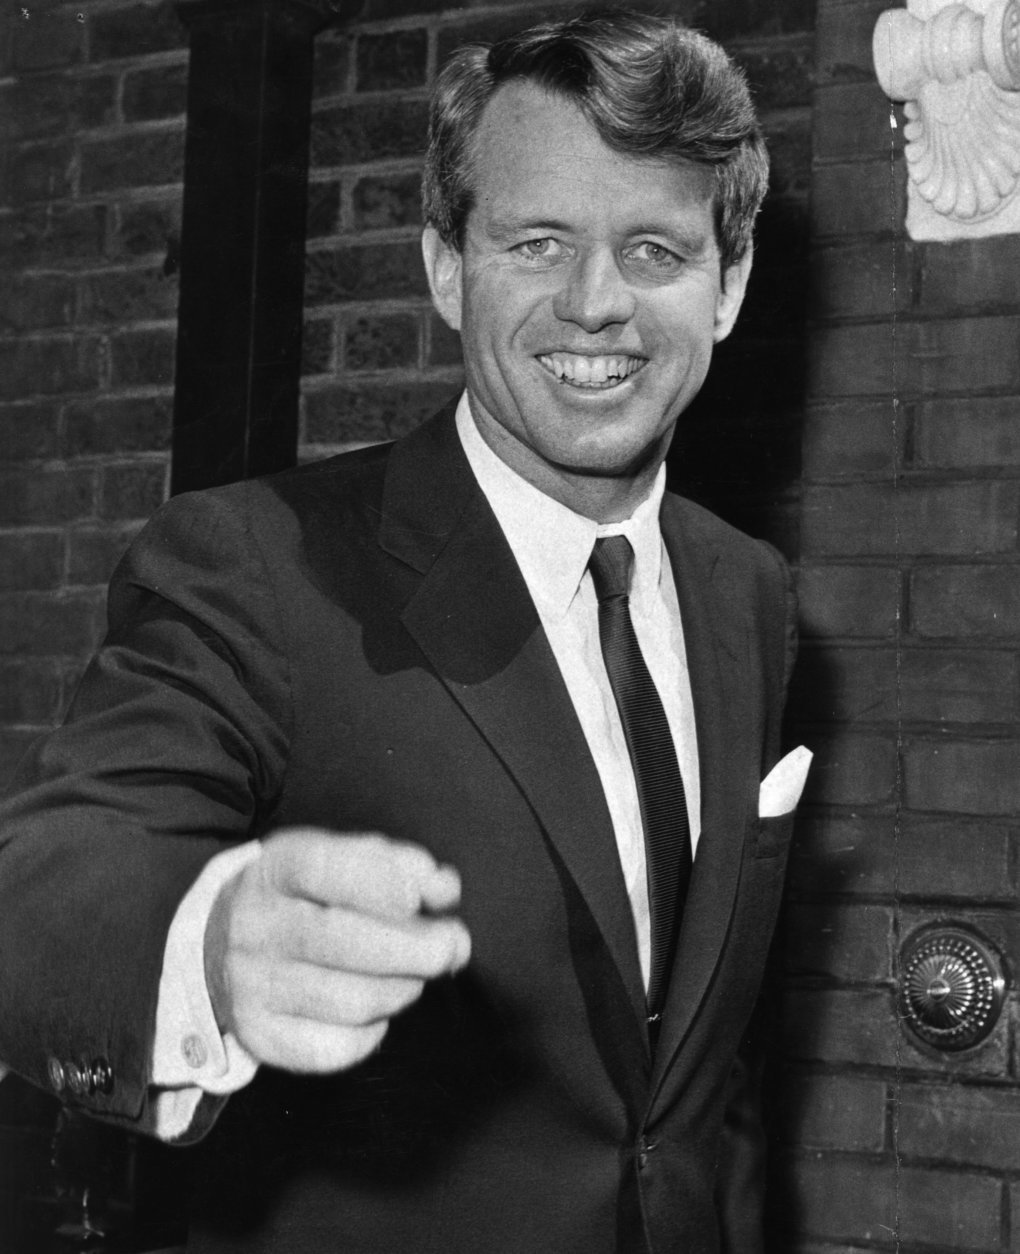 ‘A man of everybody’ remembering Robert F. Kennedy 50 years later